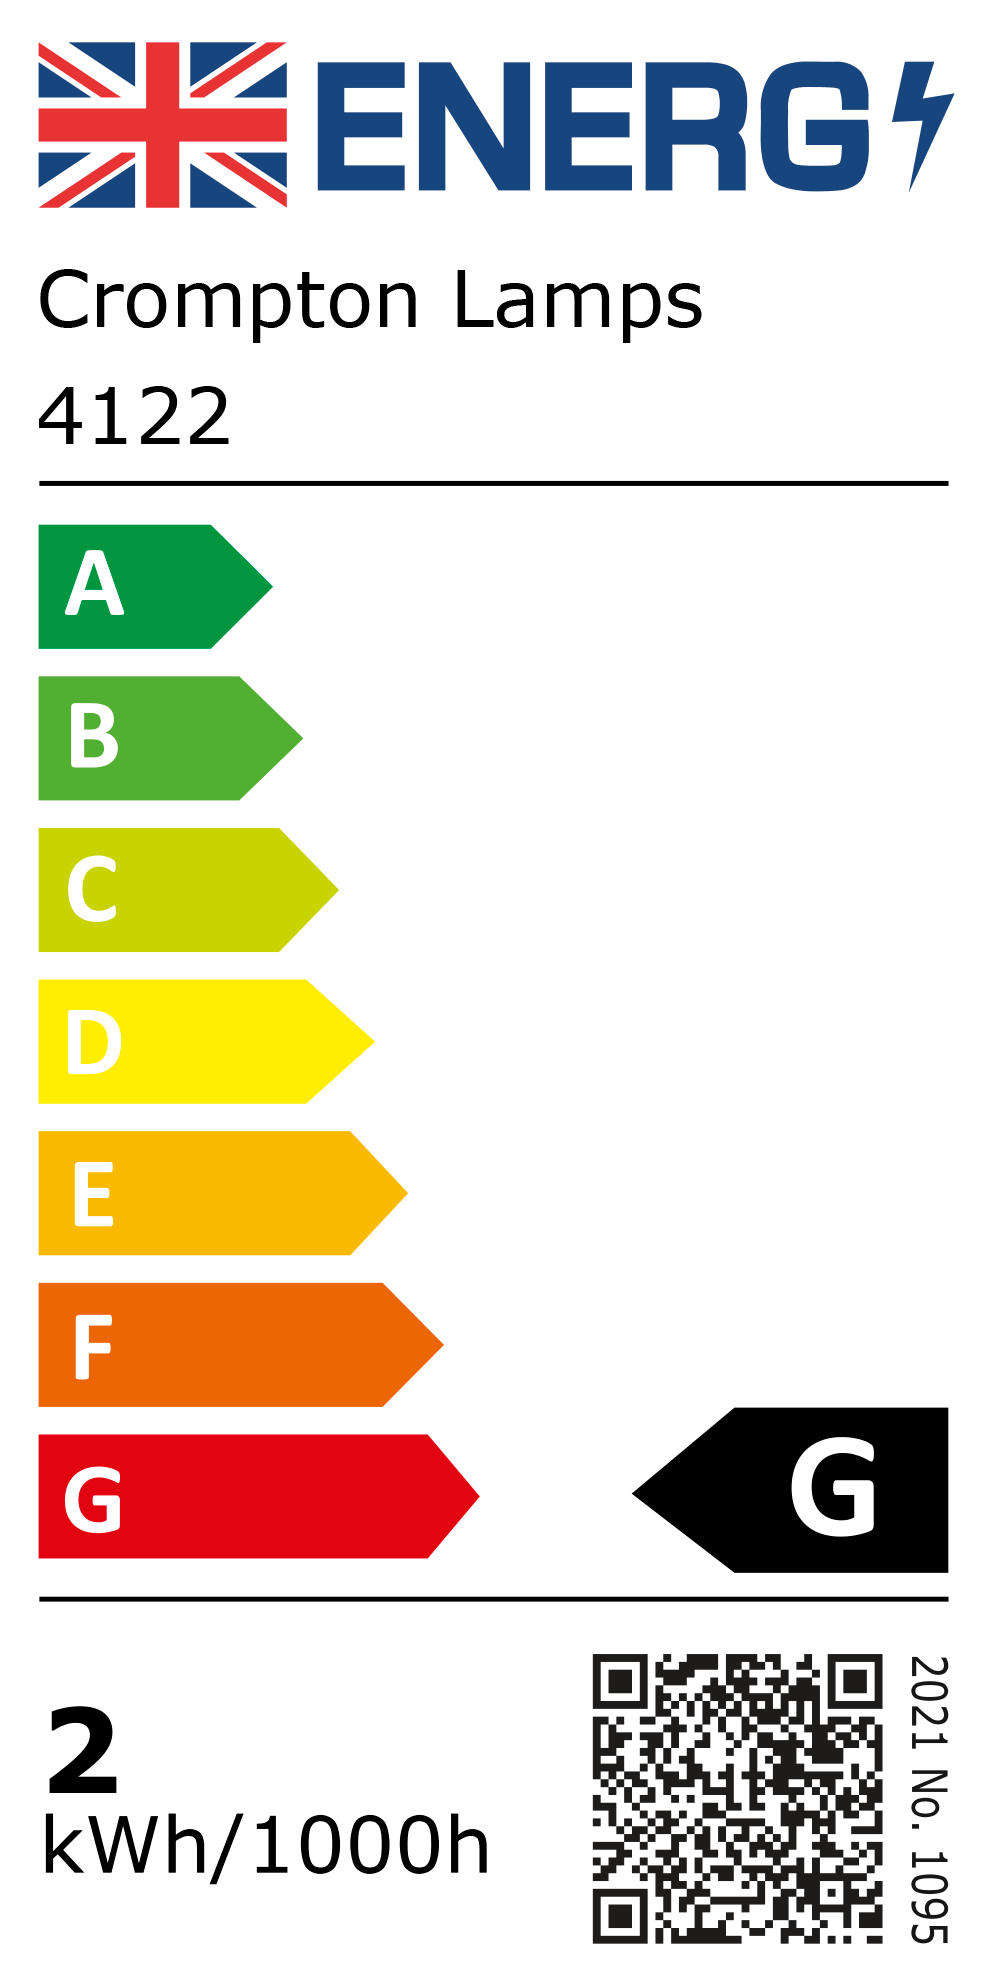 New 2021 Energy Rating Label: Stock Code 4122